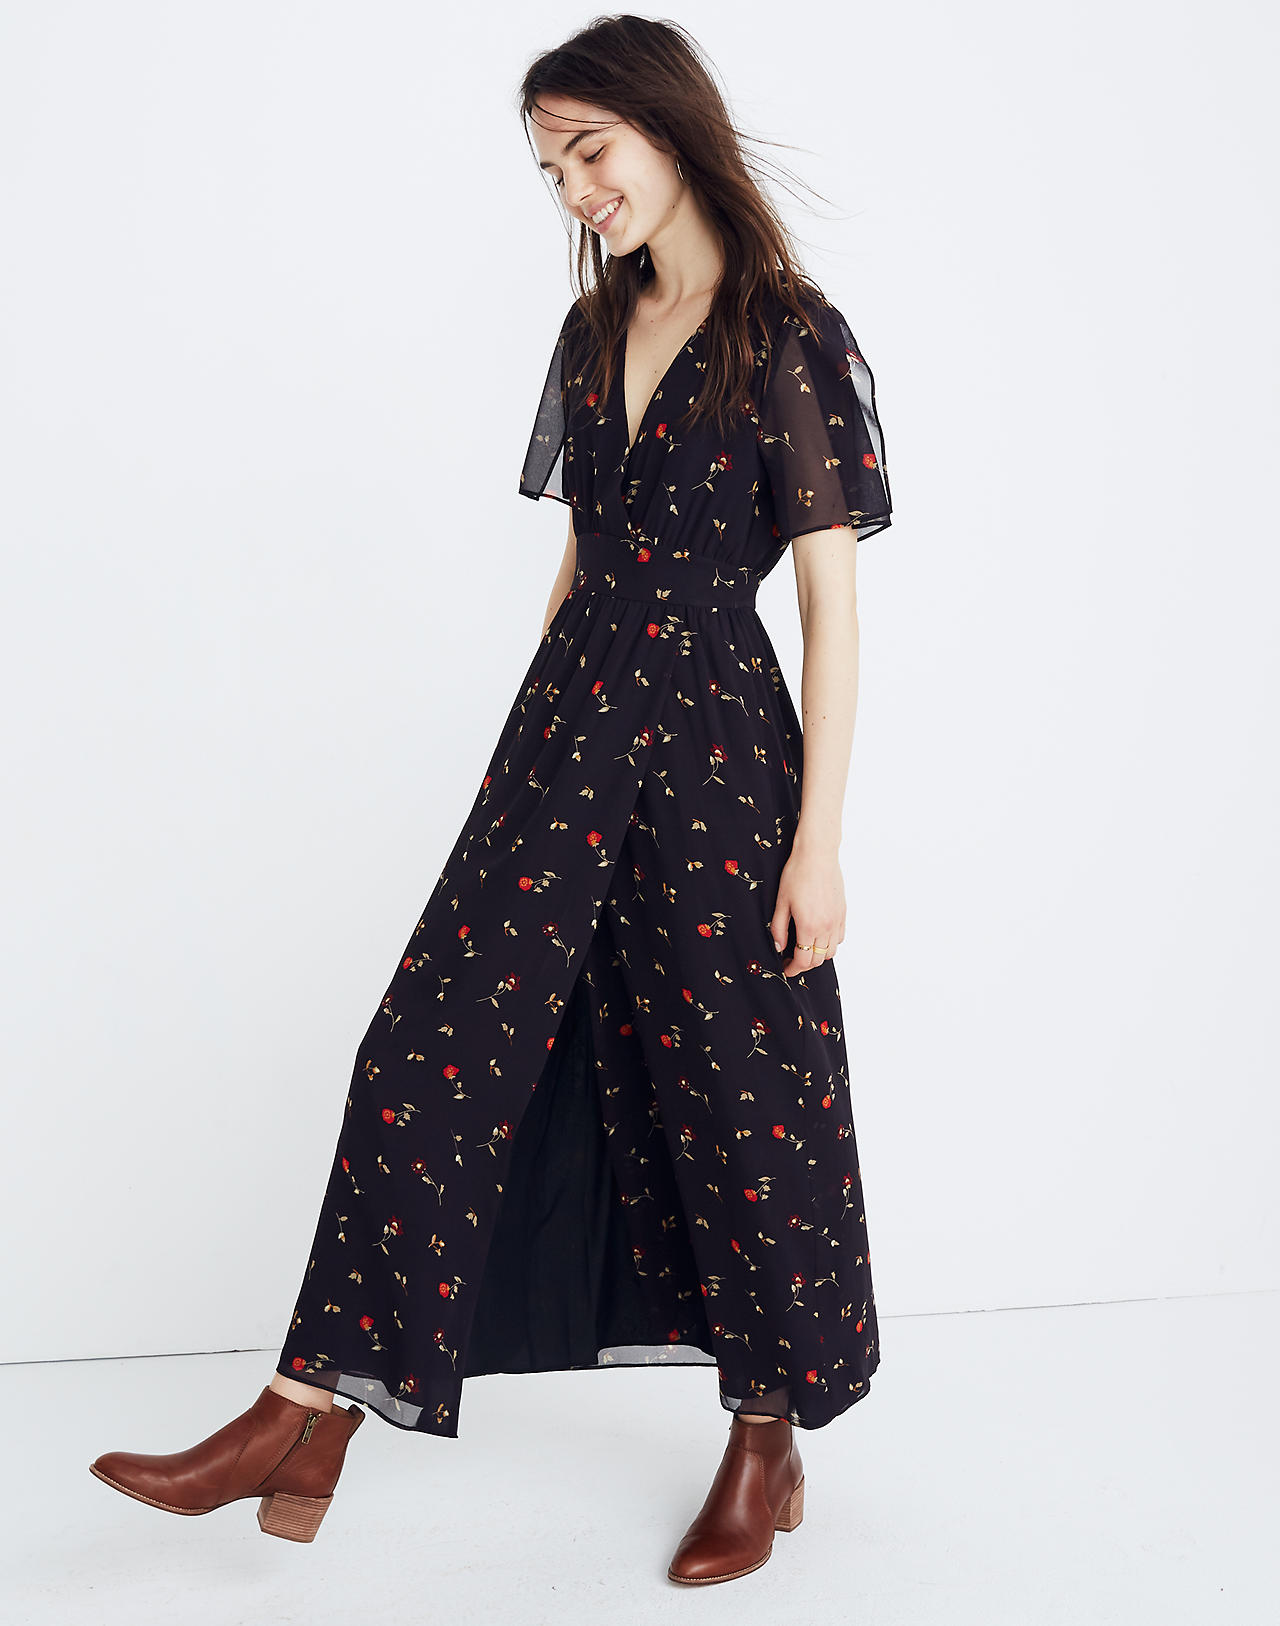 Tulip-Sleeve Maxi Dress in Sweet Blossoms